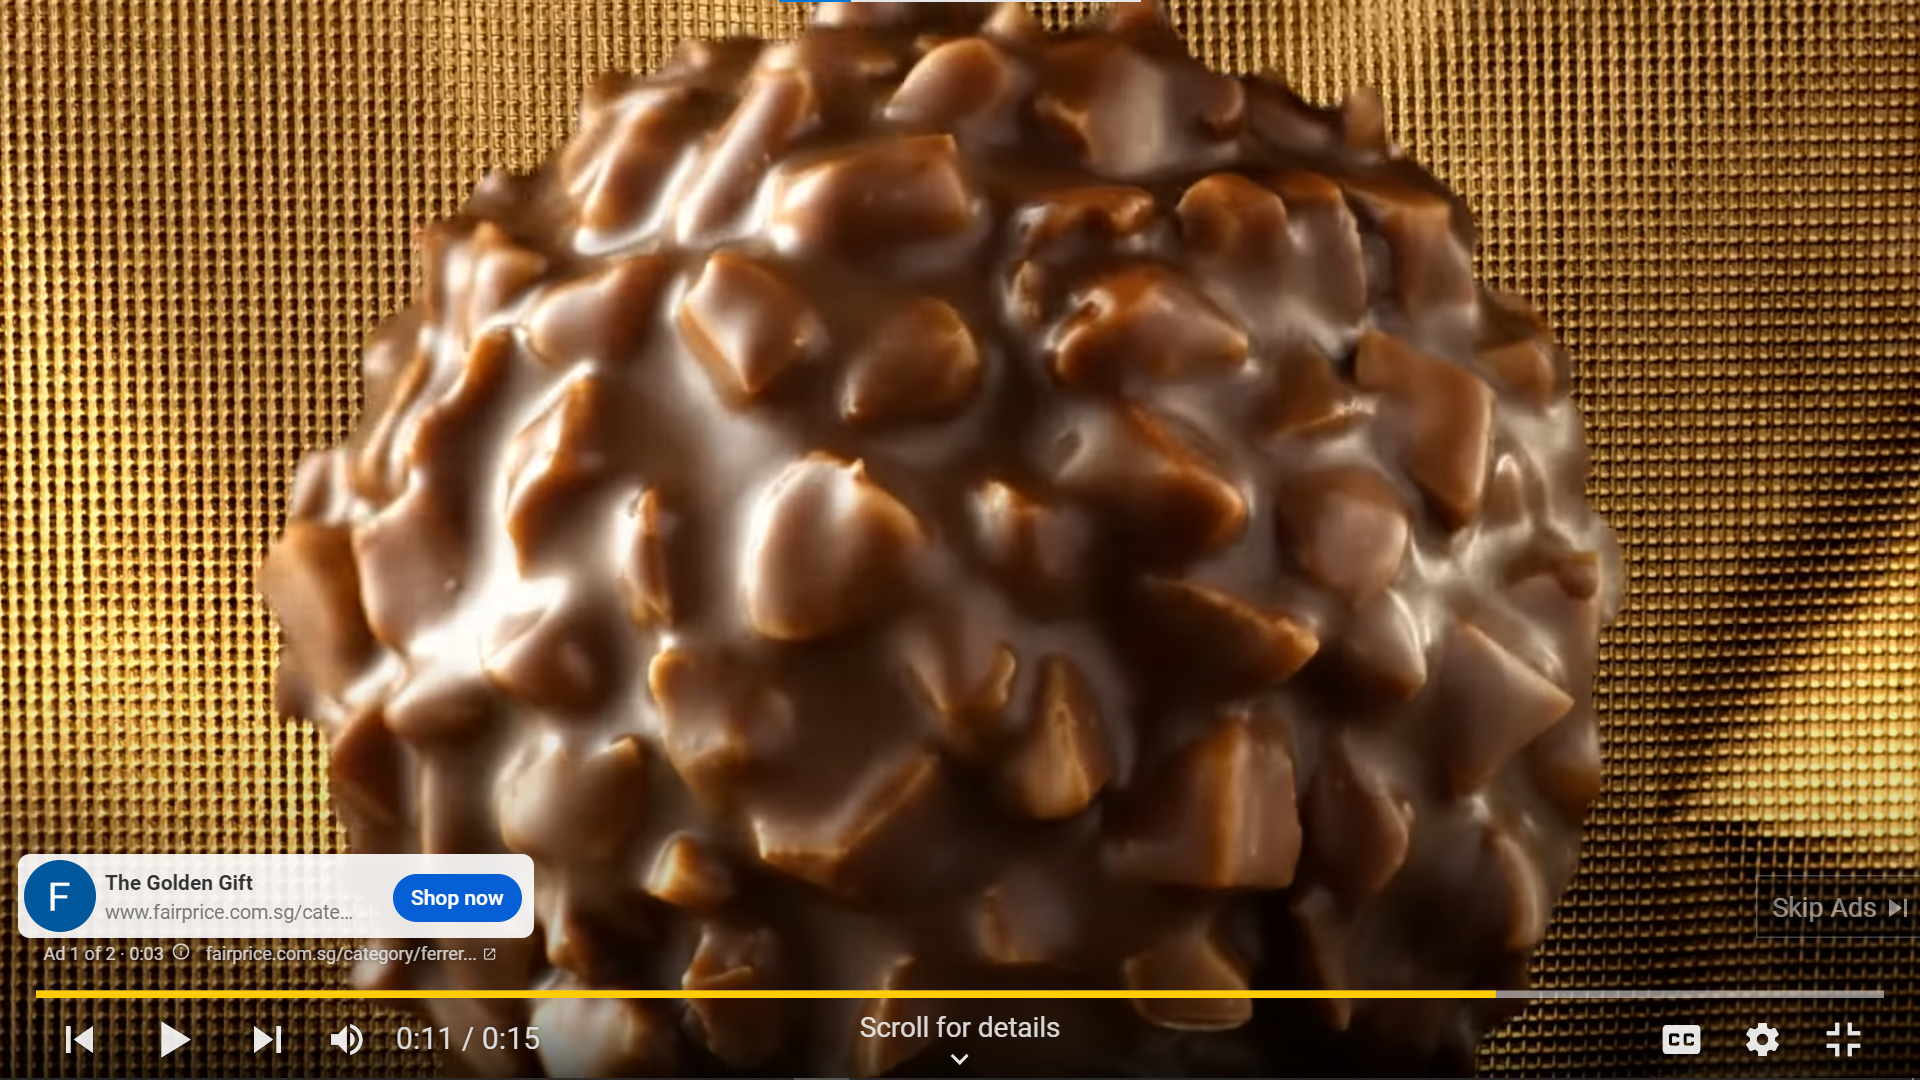 Skippable YouTube ad of Ferrero Rocher chocolates with a ‘Shop now’ button at the FairPrice supermarket